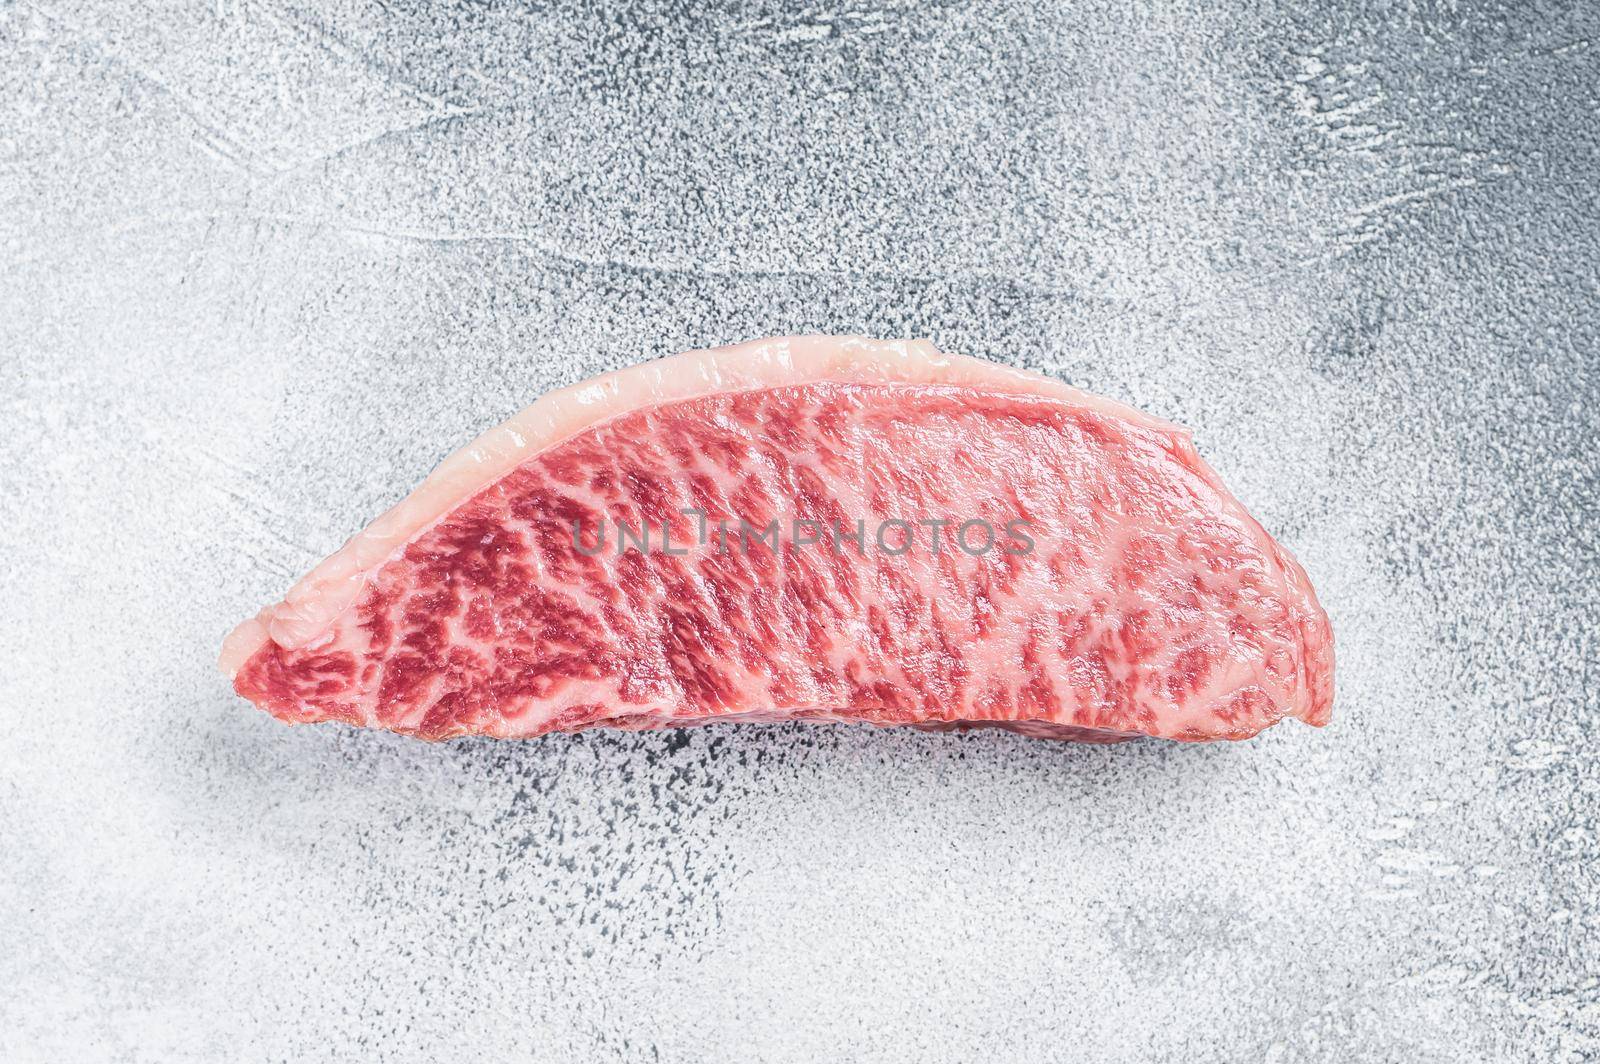 Raw wagyu rump sirloin steak, kobe beef meat. White background. Top view by Composter